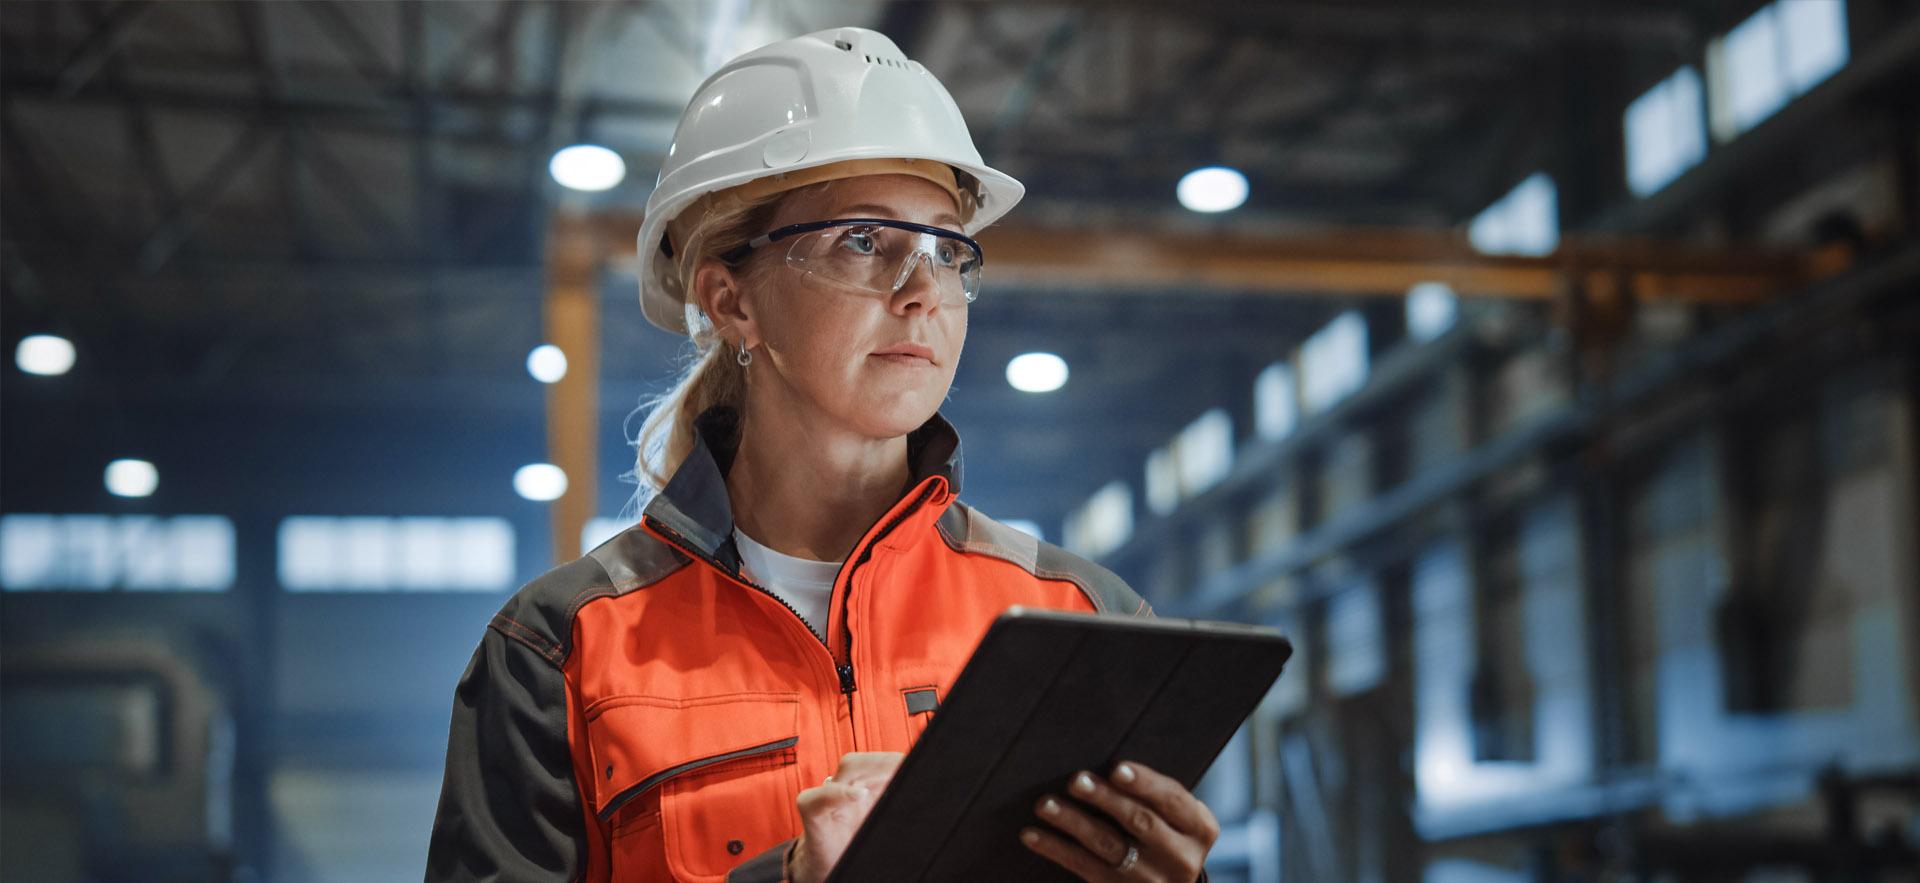 Woman with hard hat and clipboard in manufacturing plant